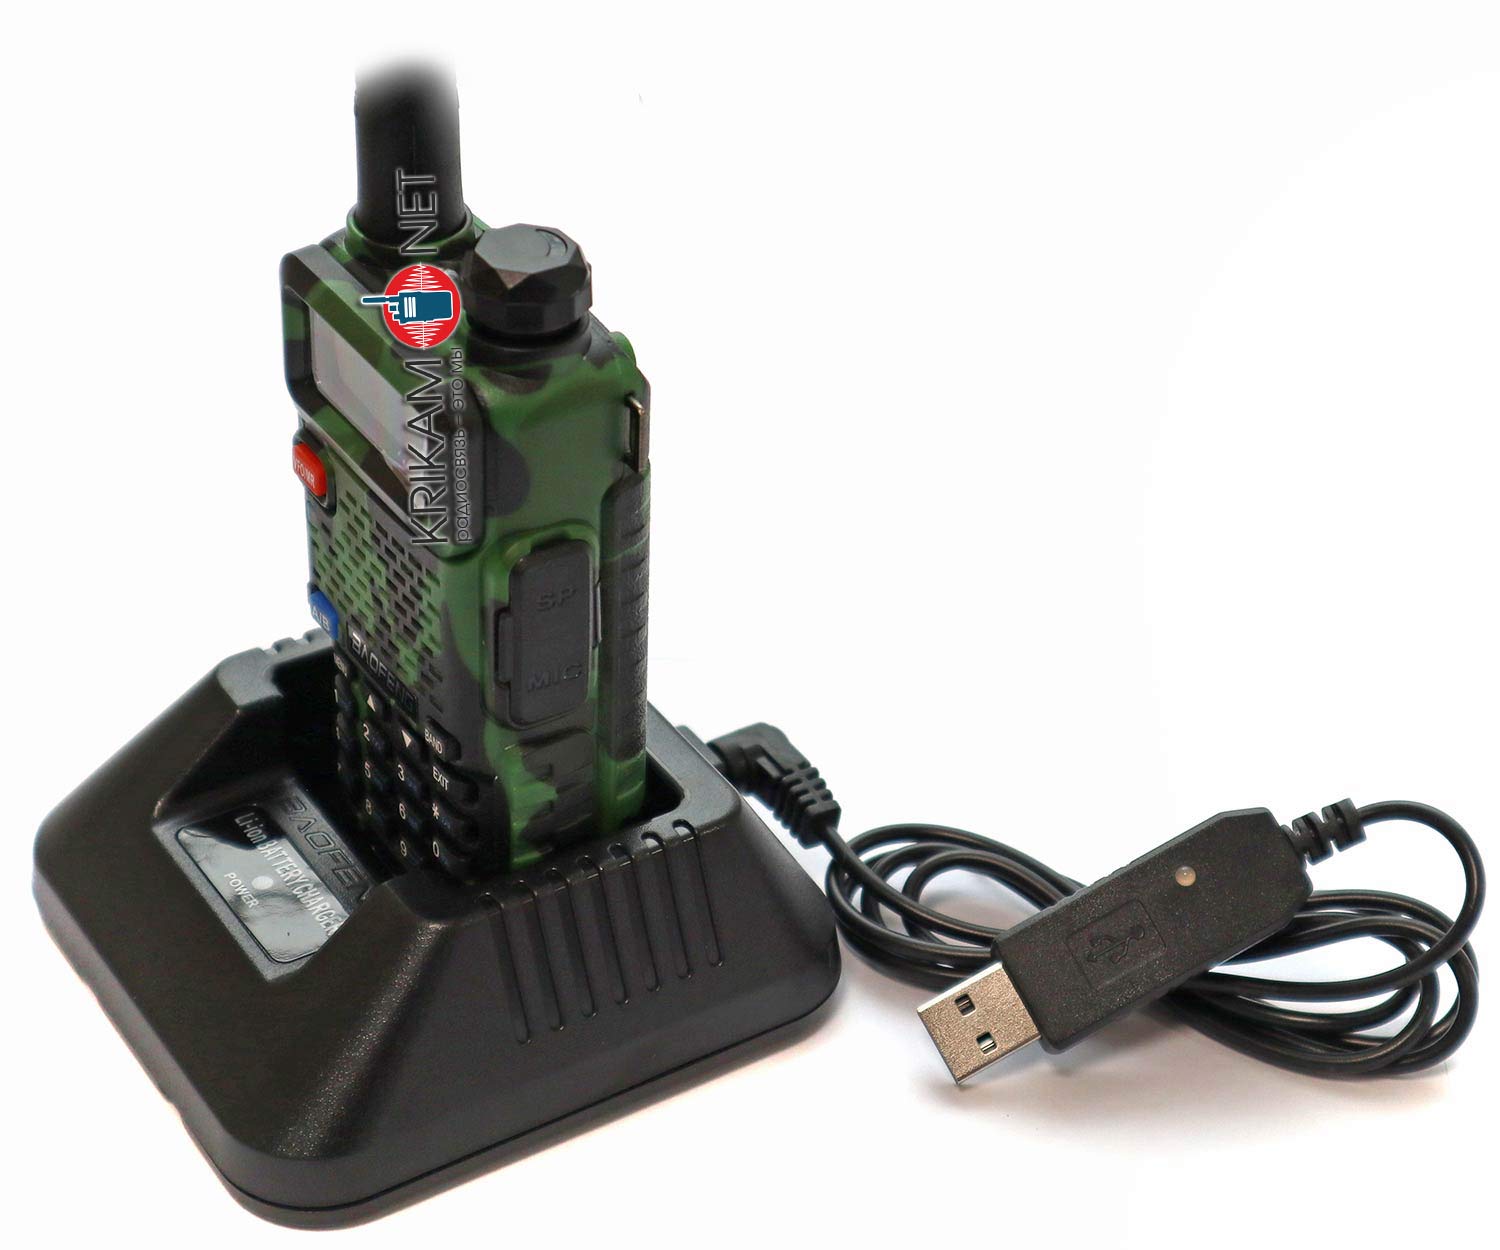 Non-standard accessories for Baofeng UV-5R: antennas, batteries, cases